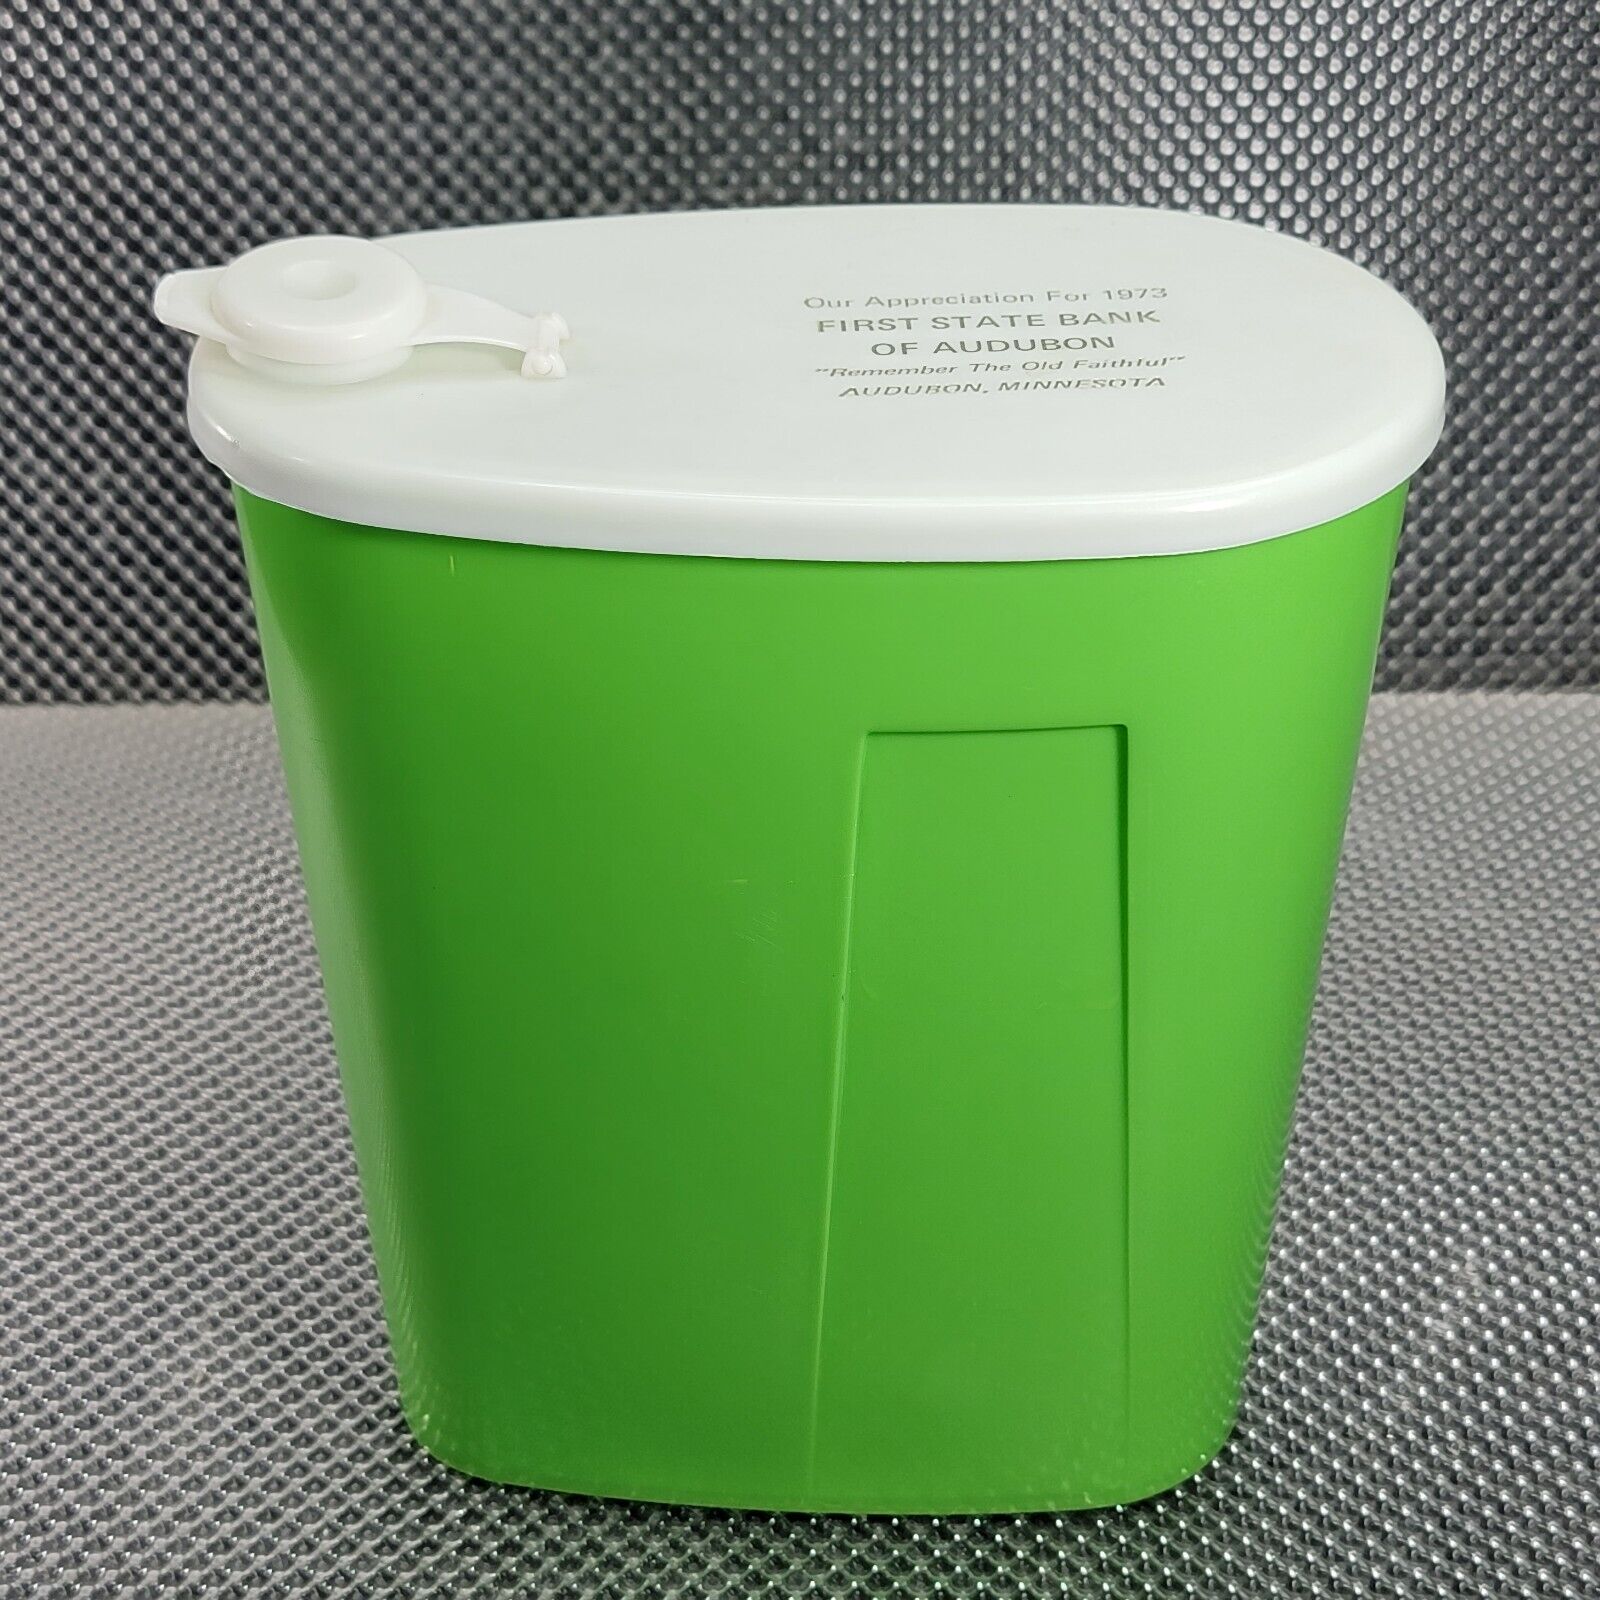 Vintage 1973 First State Bank Of Audubon MN Advertising Green Plastic Container 